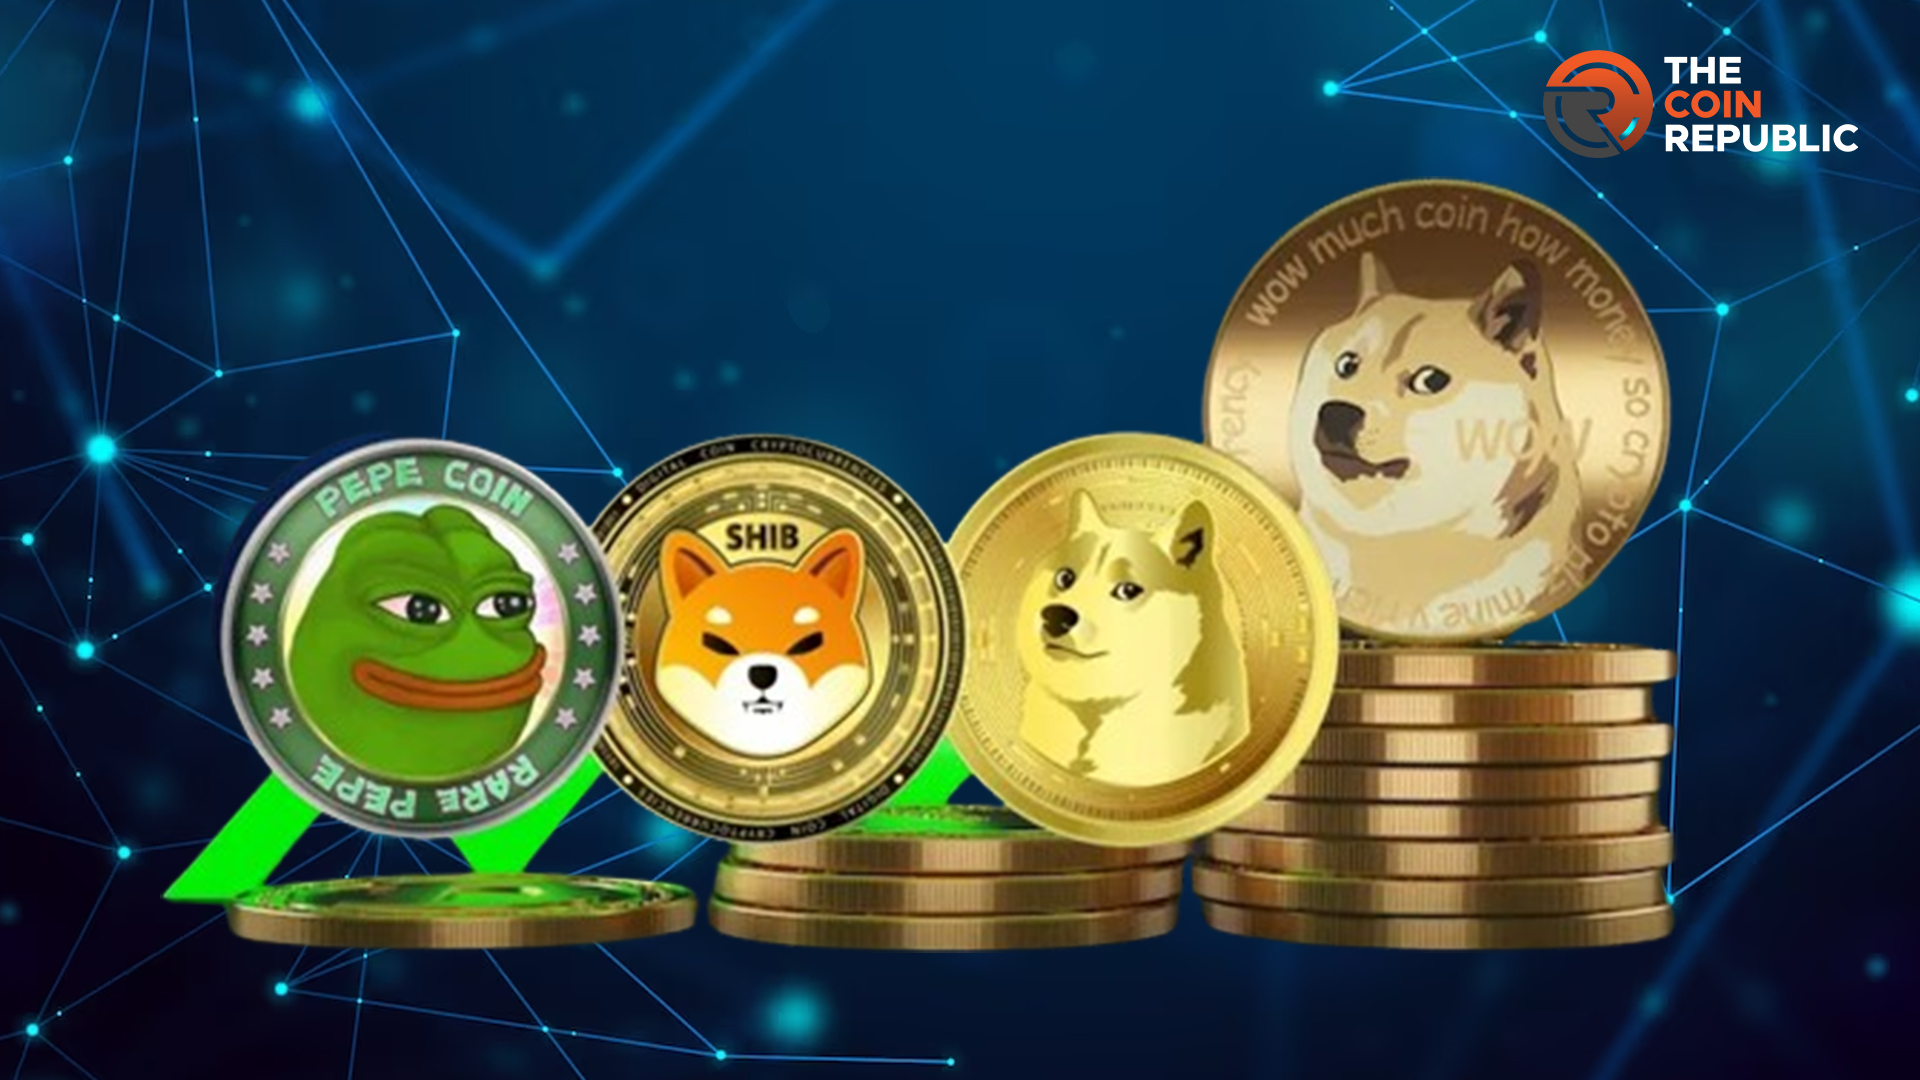 Meme Coins: Cryptos Created Out of Humor and Meme Content